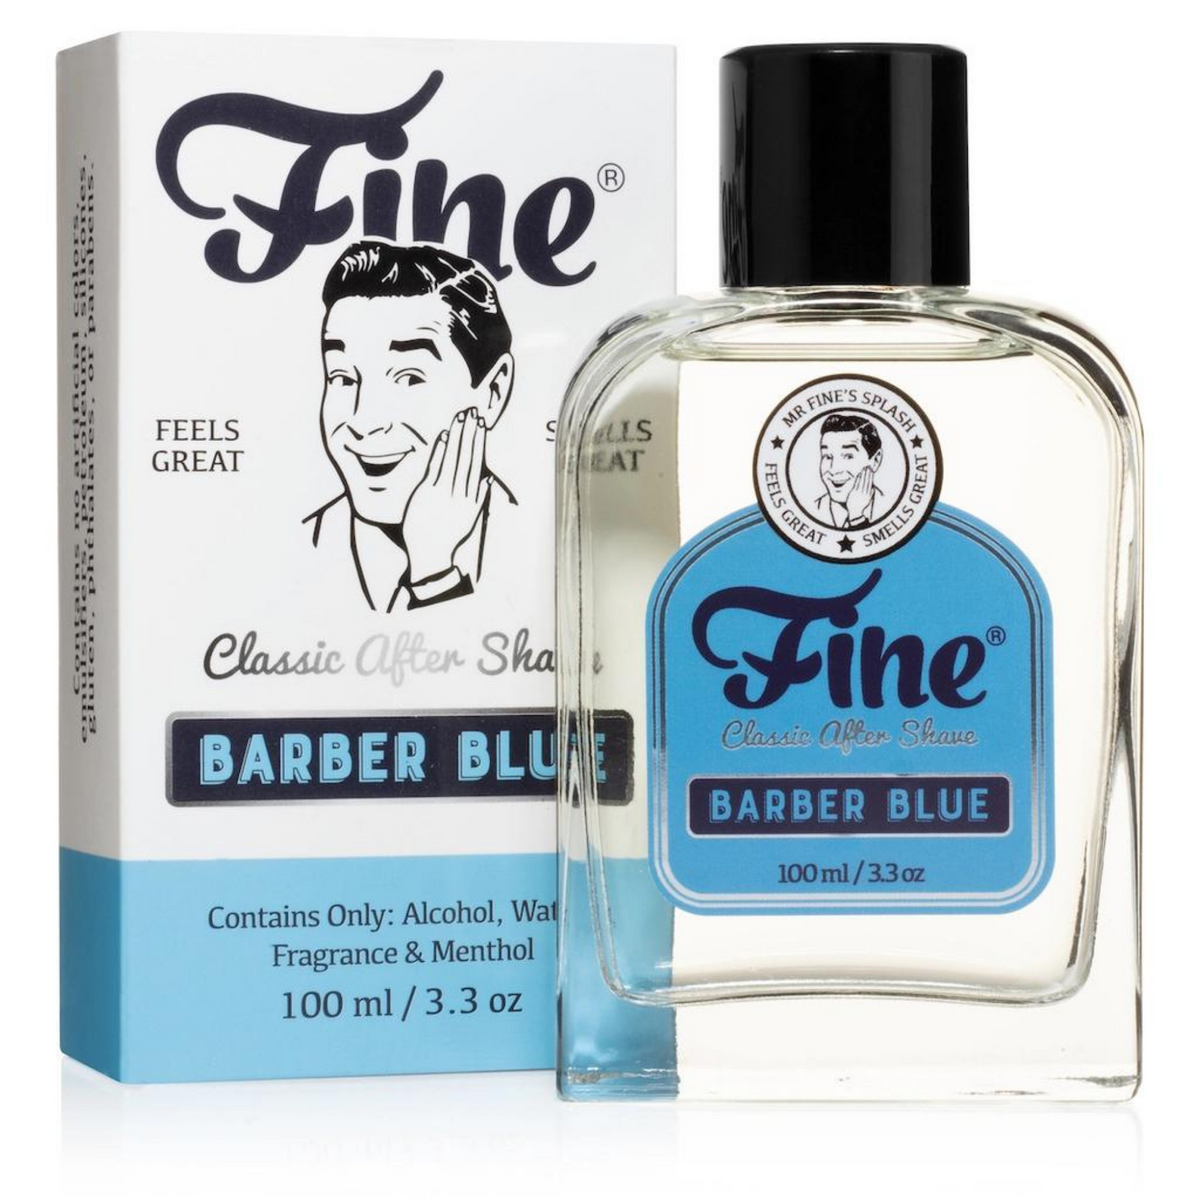 Primary Image of Barber Blue Classic After Shave (3.3 oz)